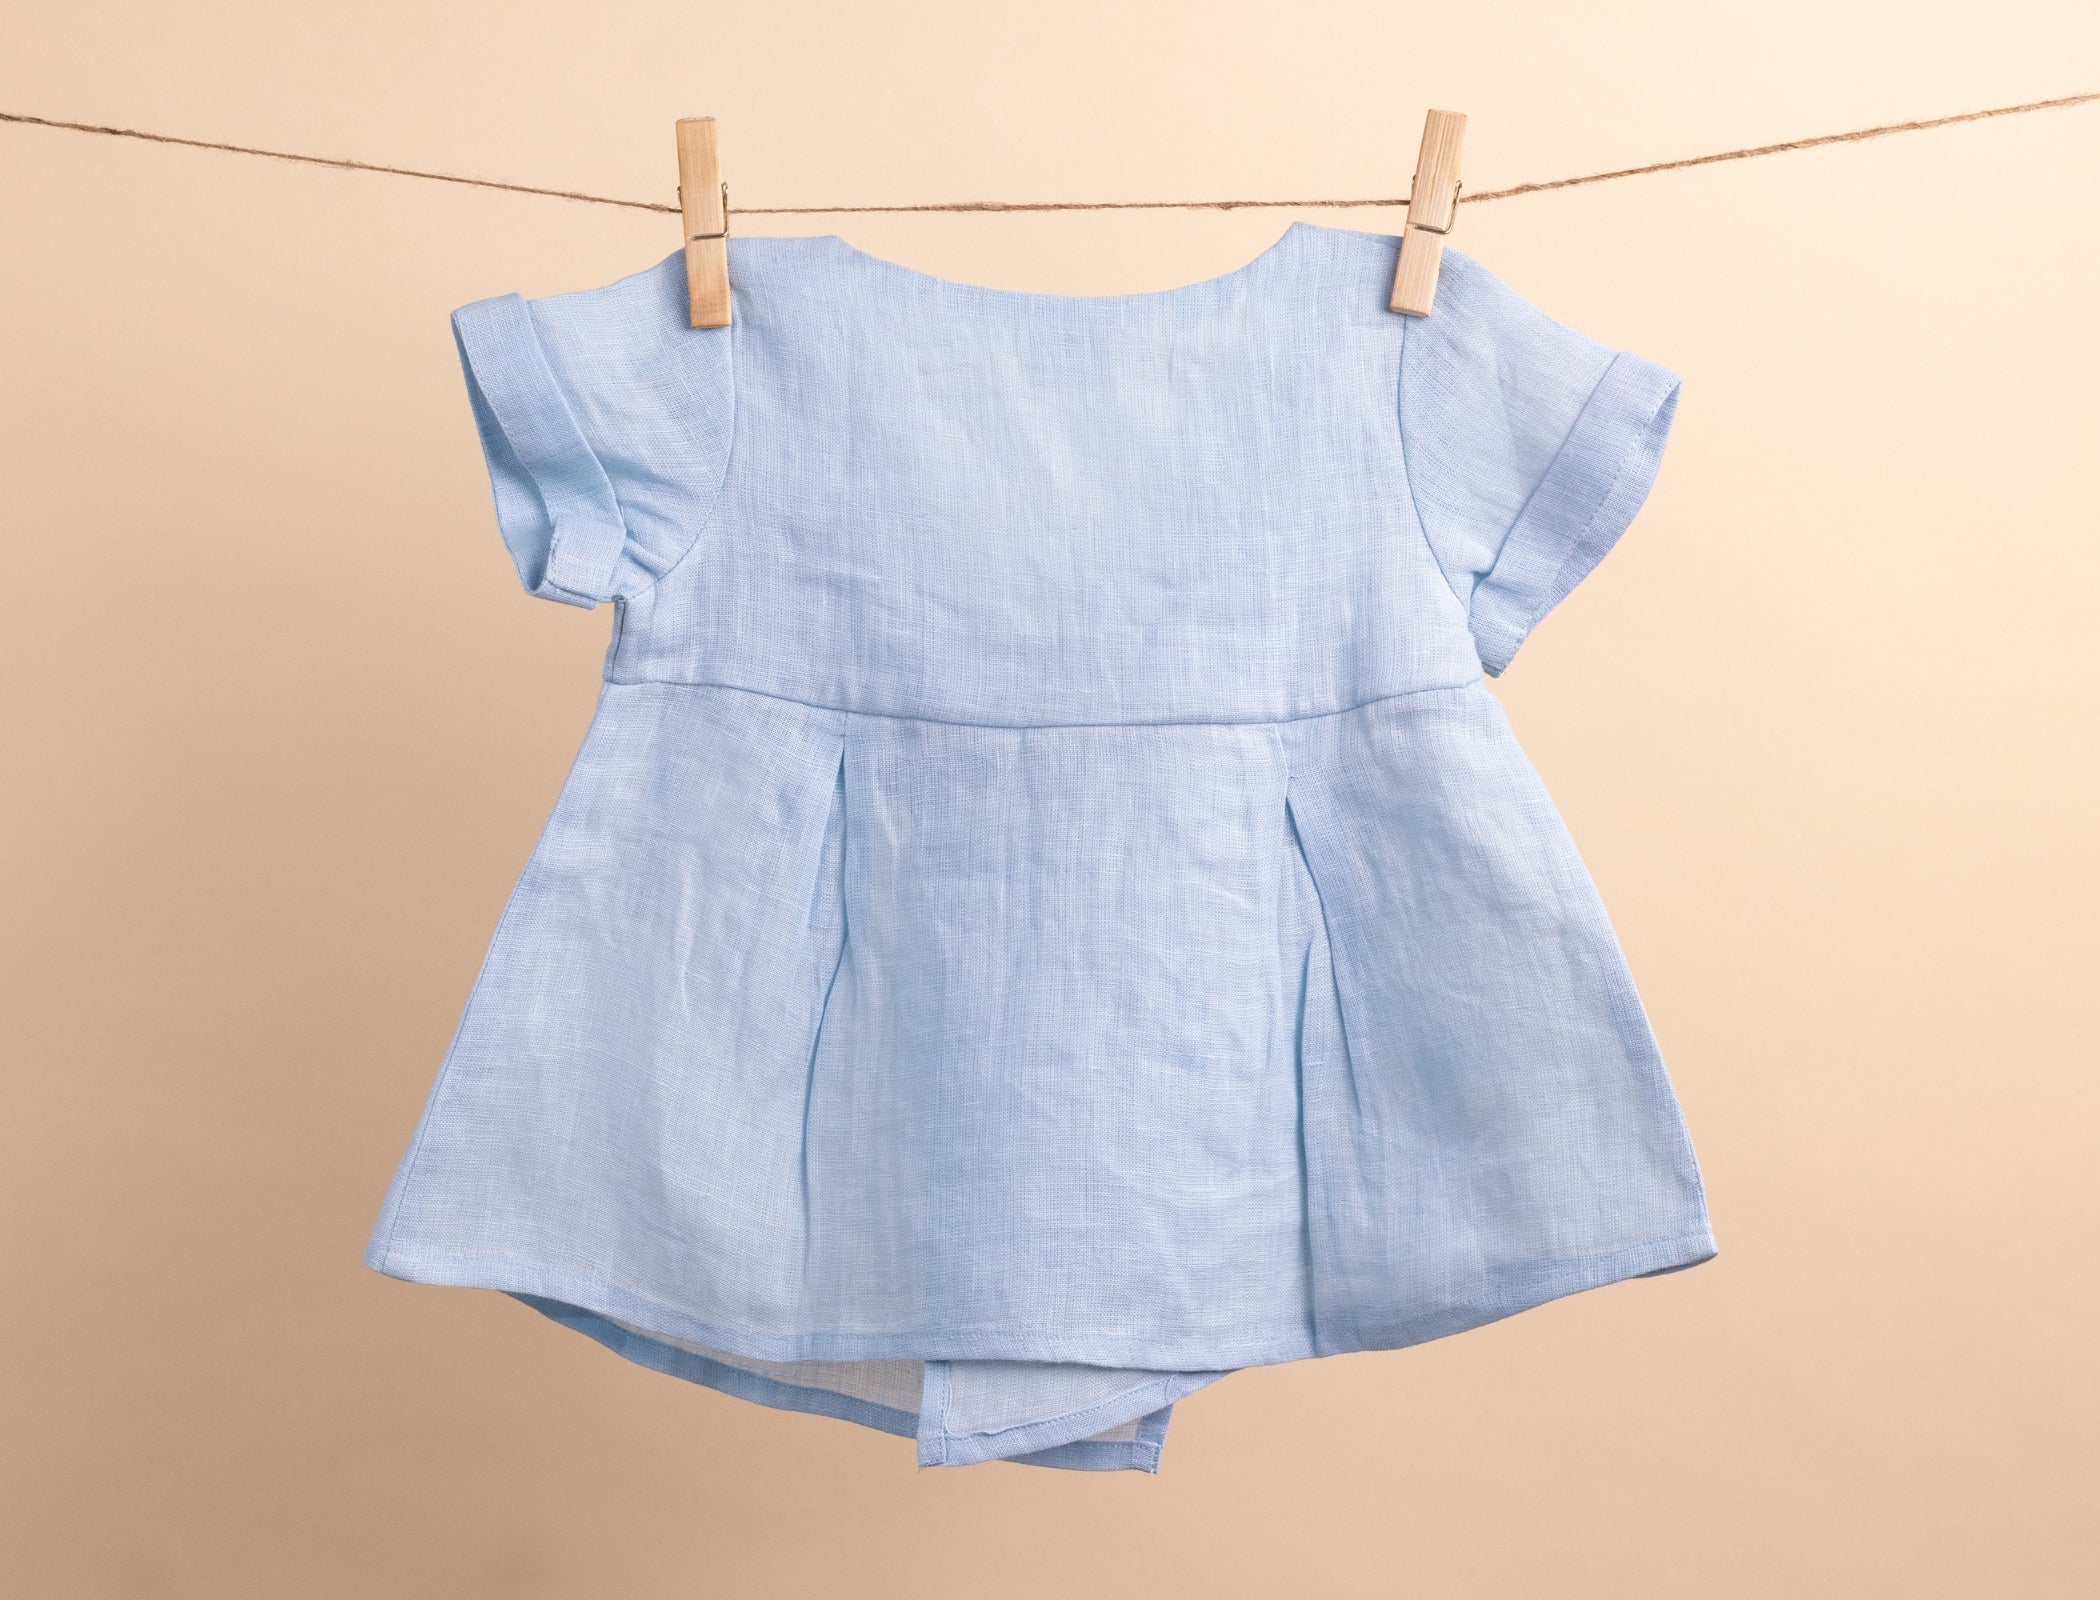 How To Dress a Newborn Baby in the Summer | Mom.com